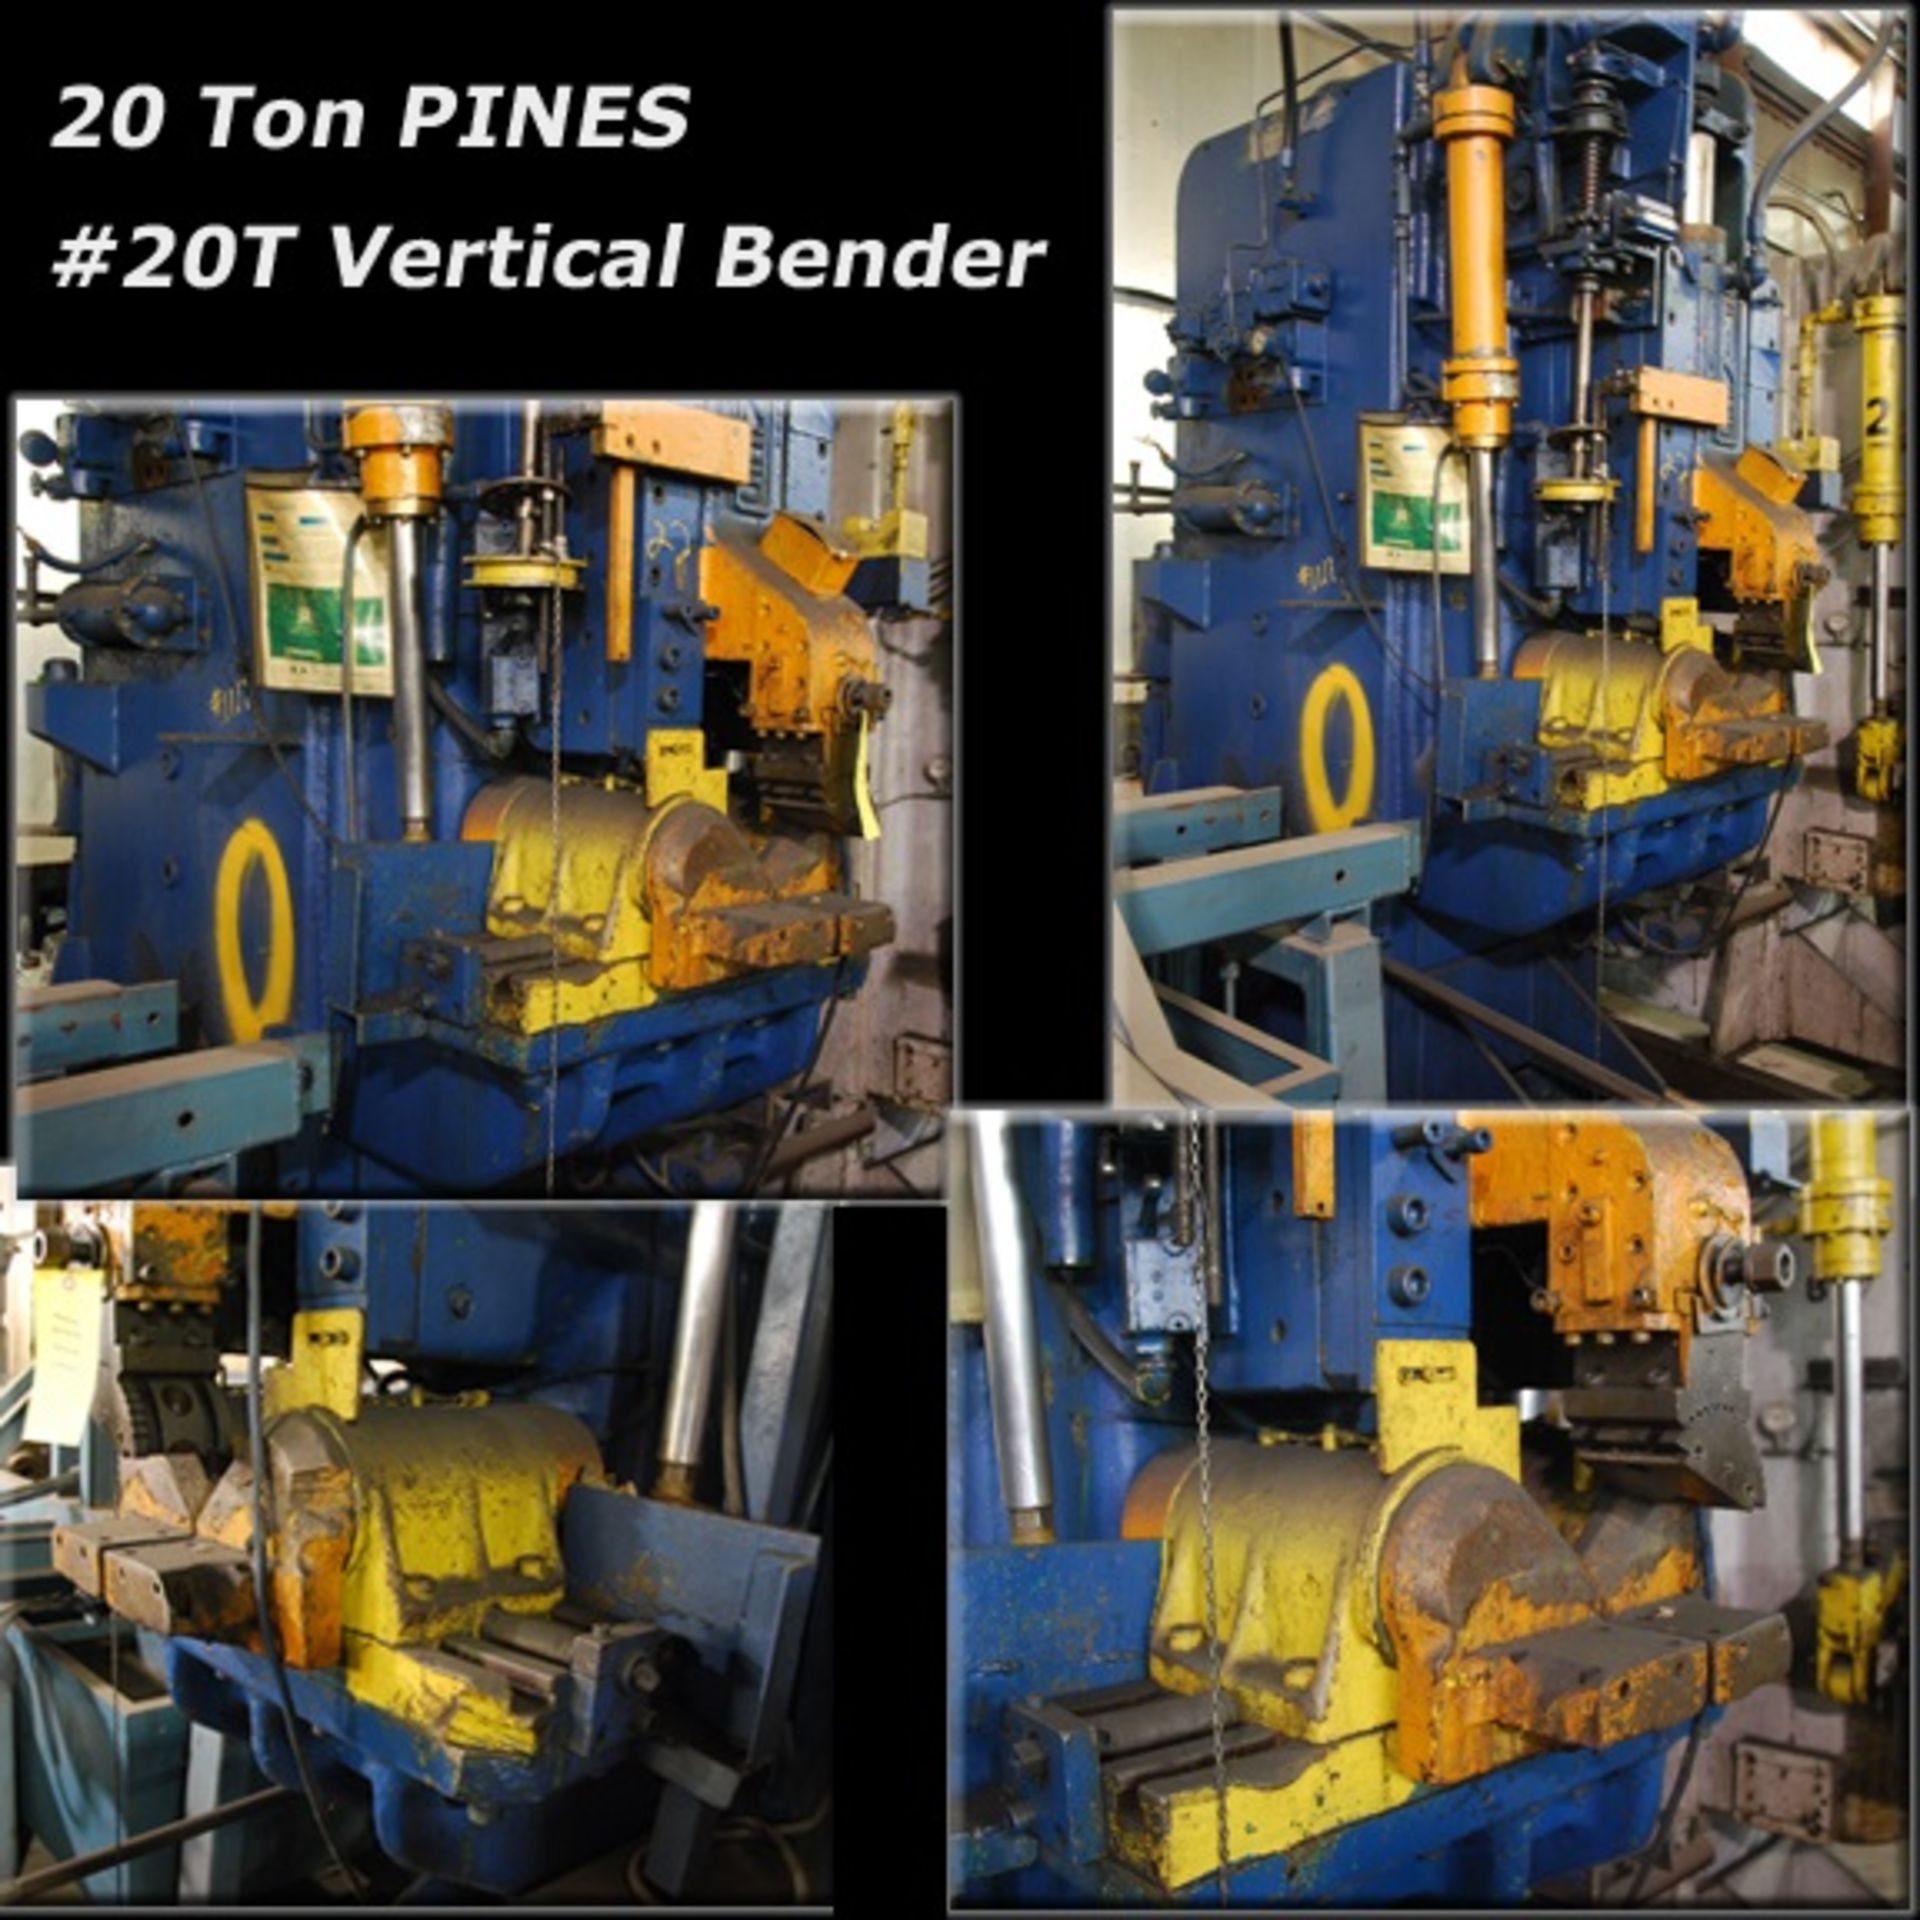 20 Ton PINES #20T Vertical Tube Bender (Location: Toledo, OH USA)